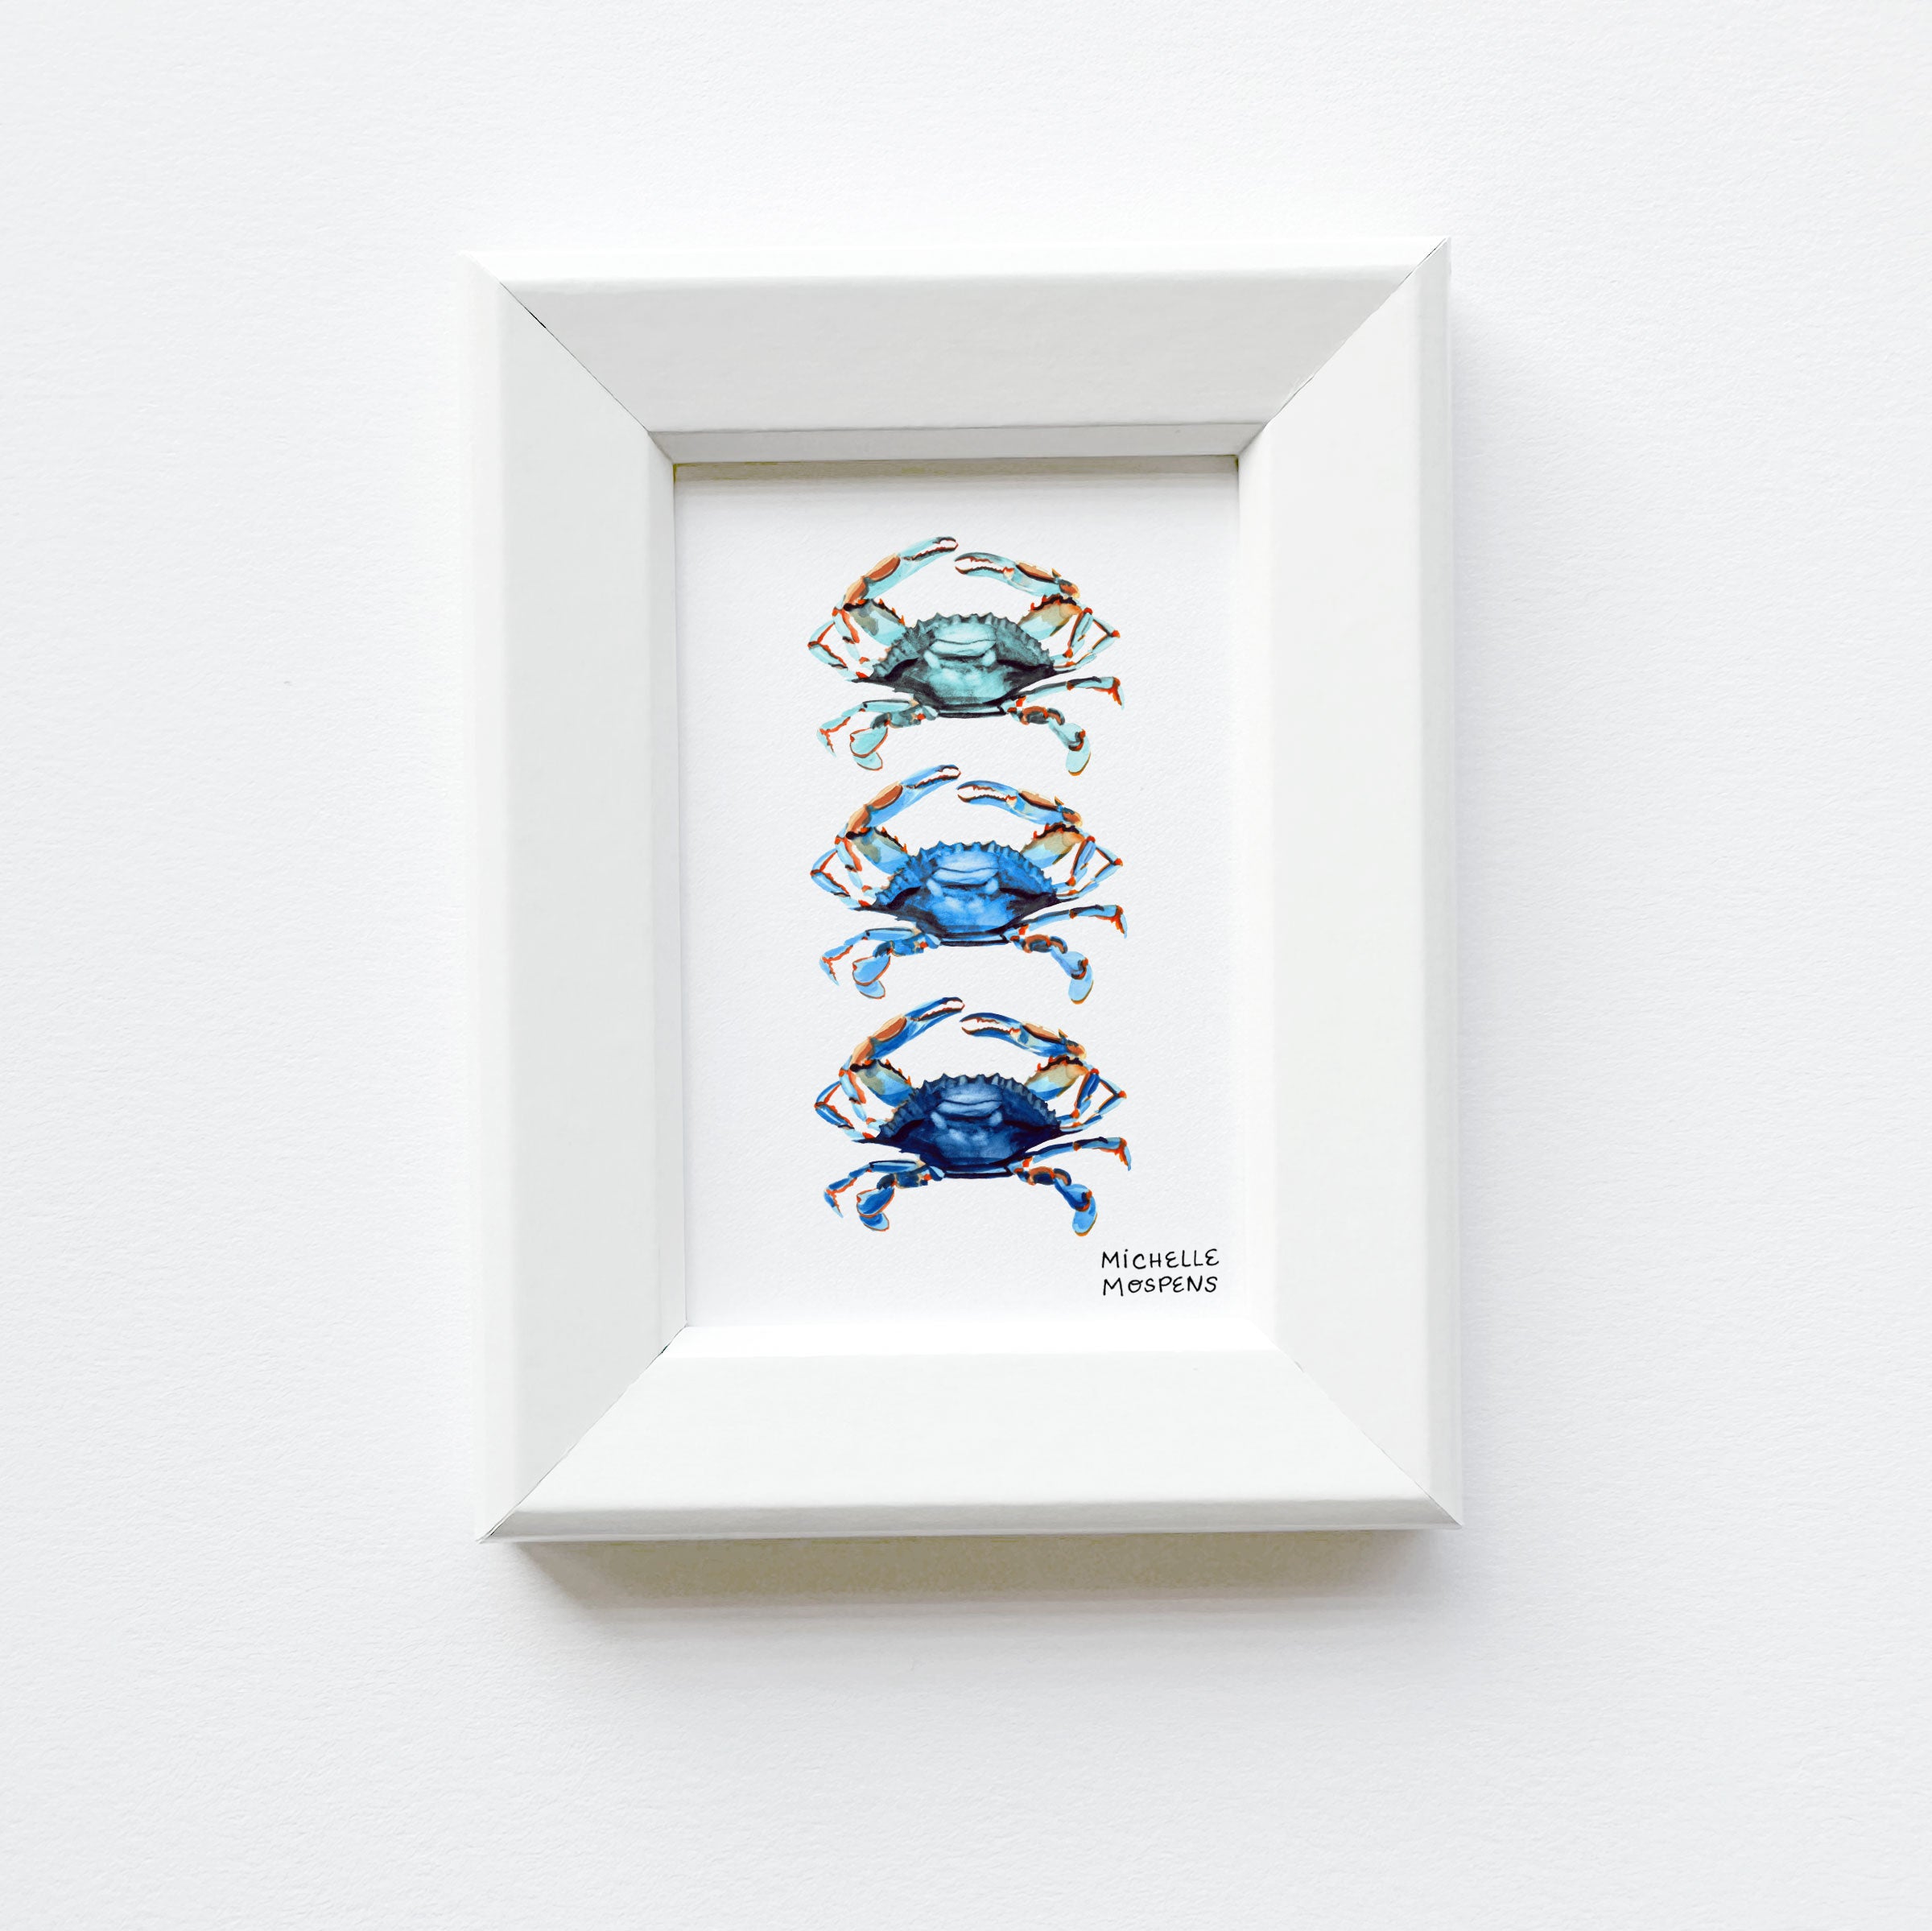 Miniature Coastal Crabs Watercolor Art Painting Framed Print by Michelle Mospens | Mini Framed Nautical Crabs Artwork